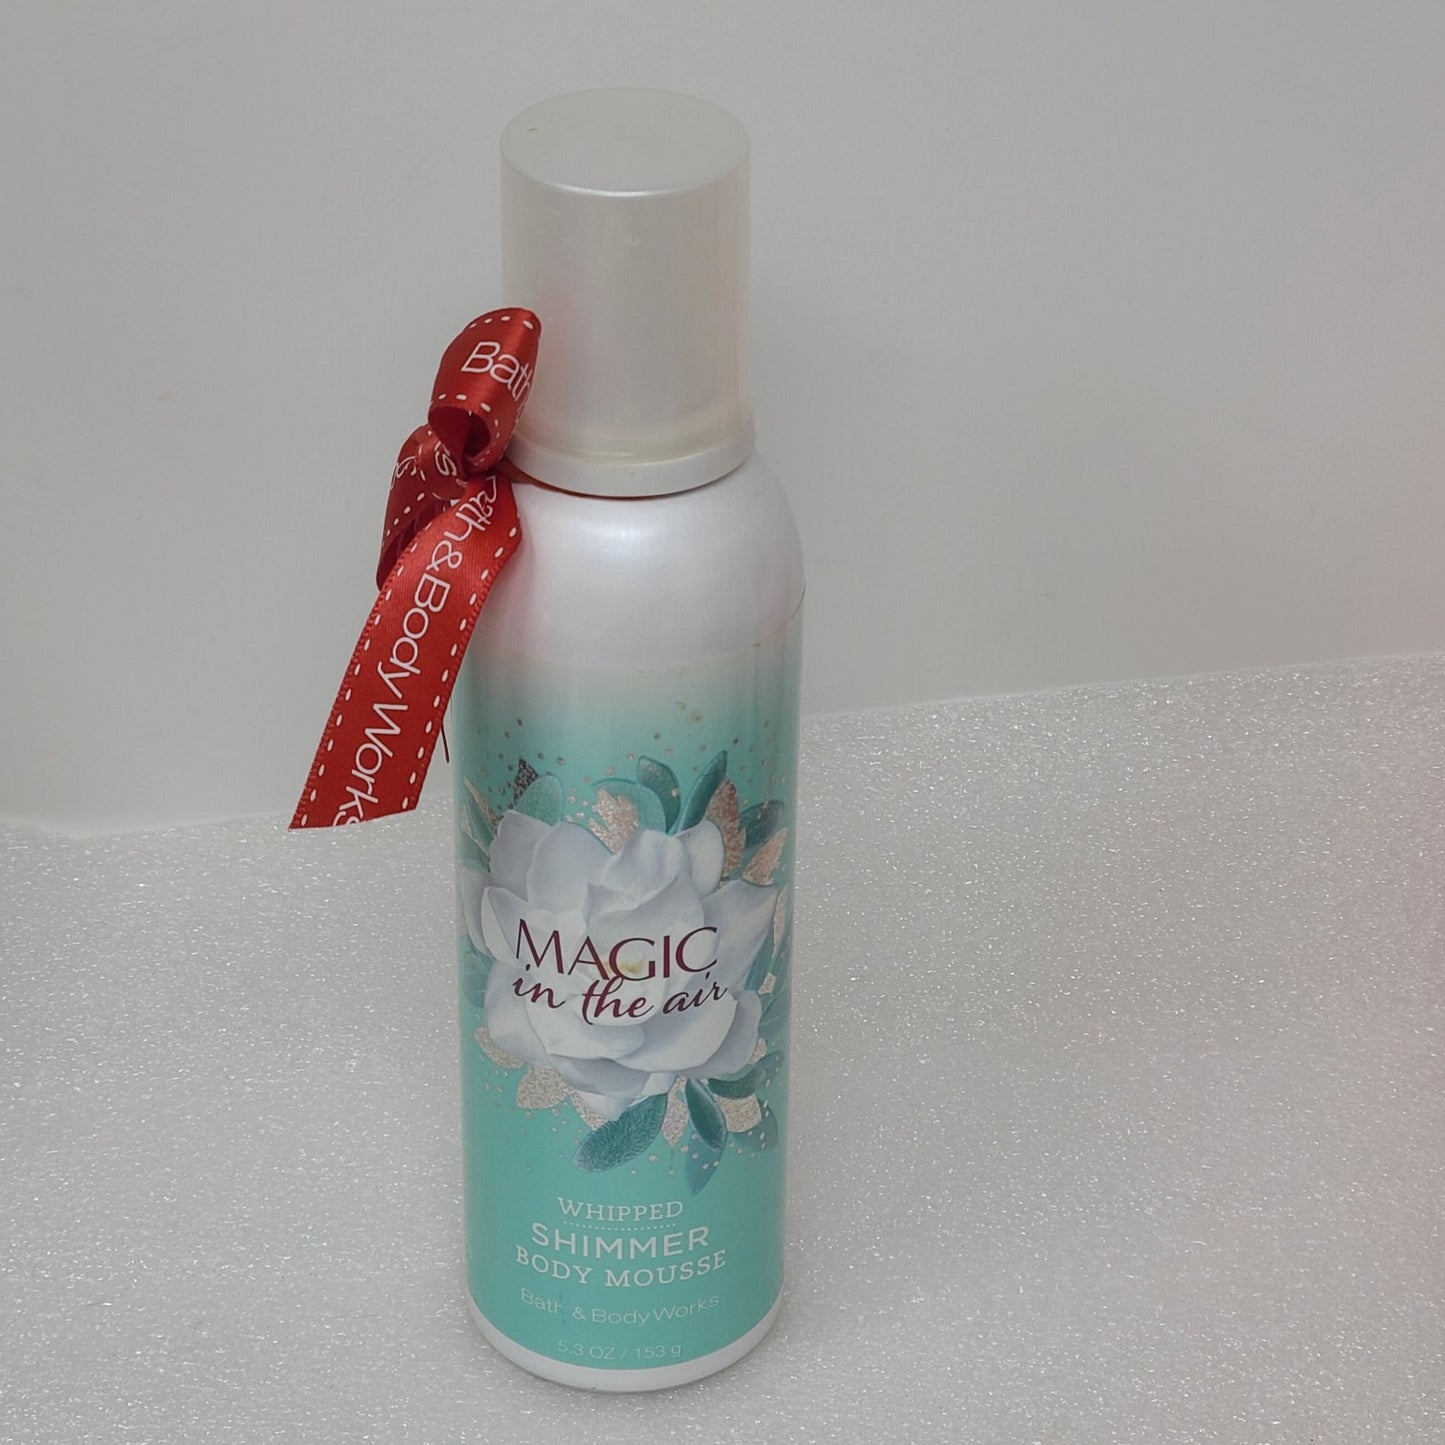 Bath & Body Works Magic In The Air Whipped Shimmer Body Mousse 5.3 Oz